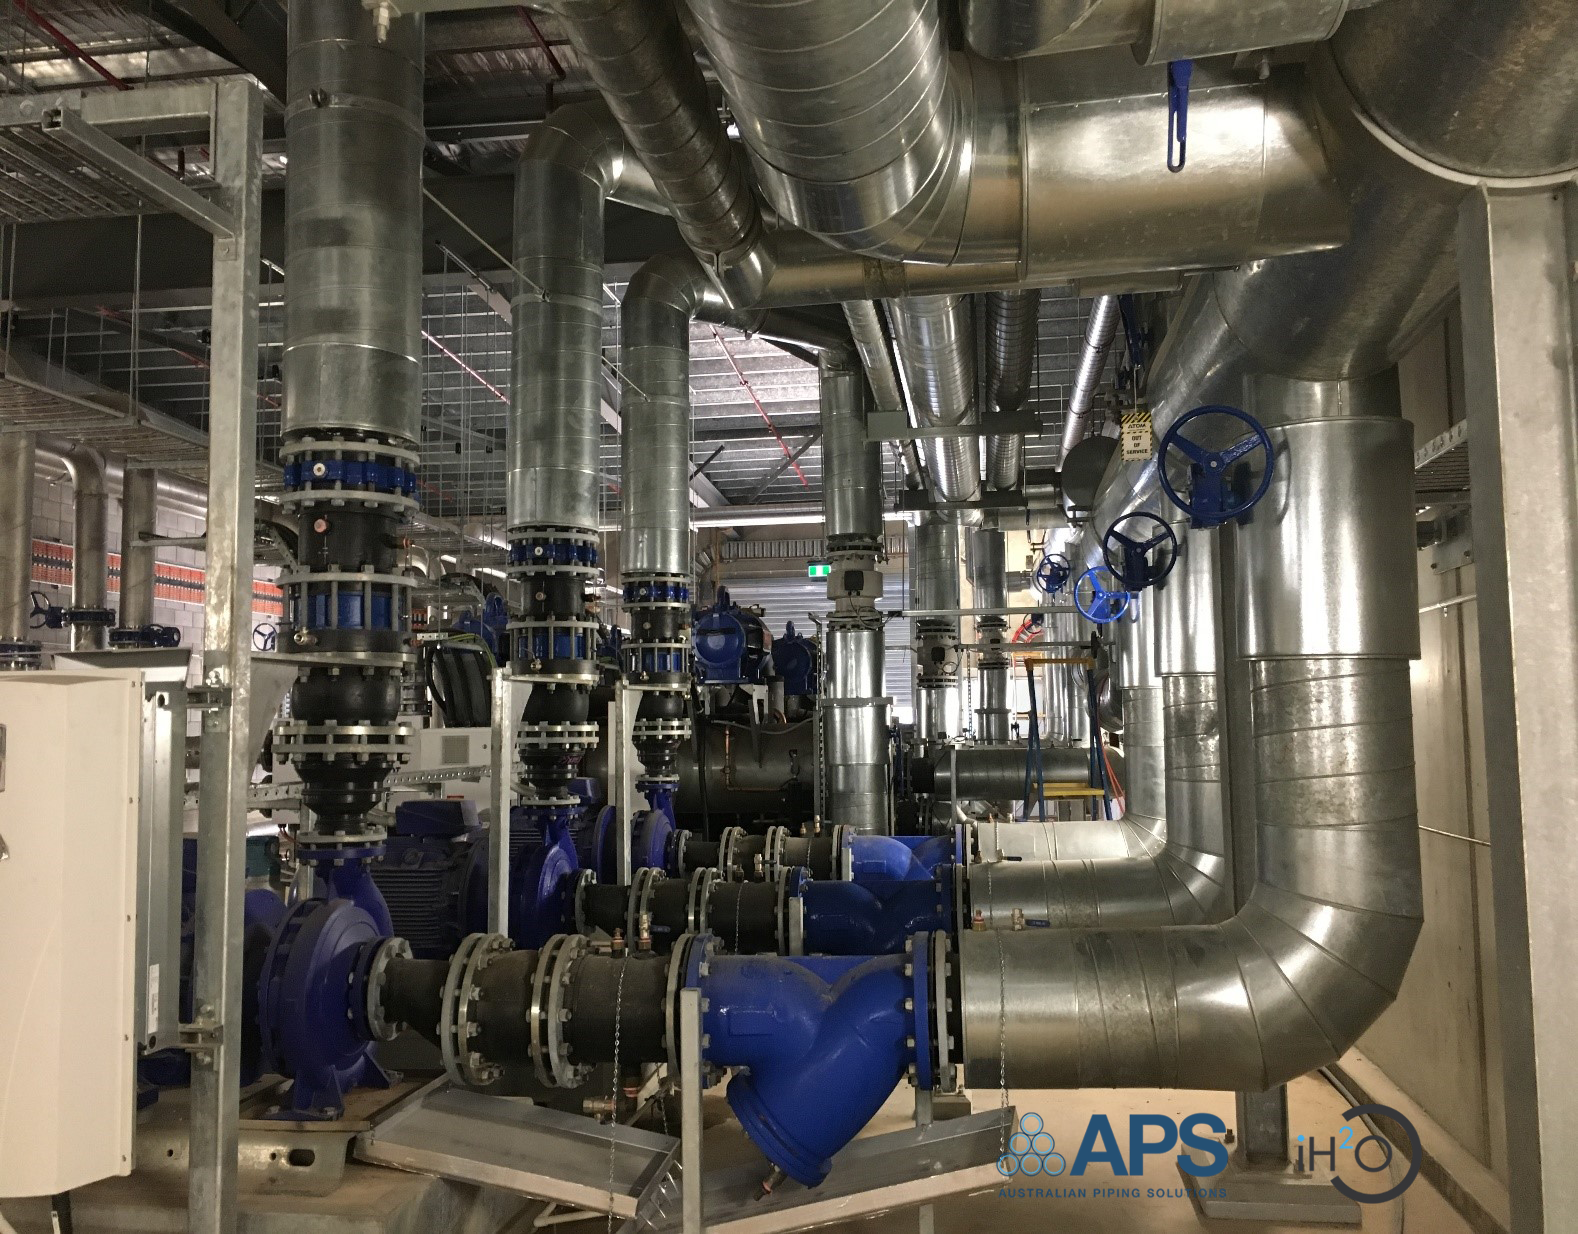 Images Australian Piping Solutions Pty Ltd